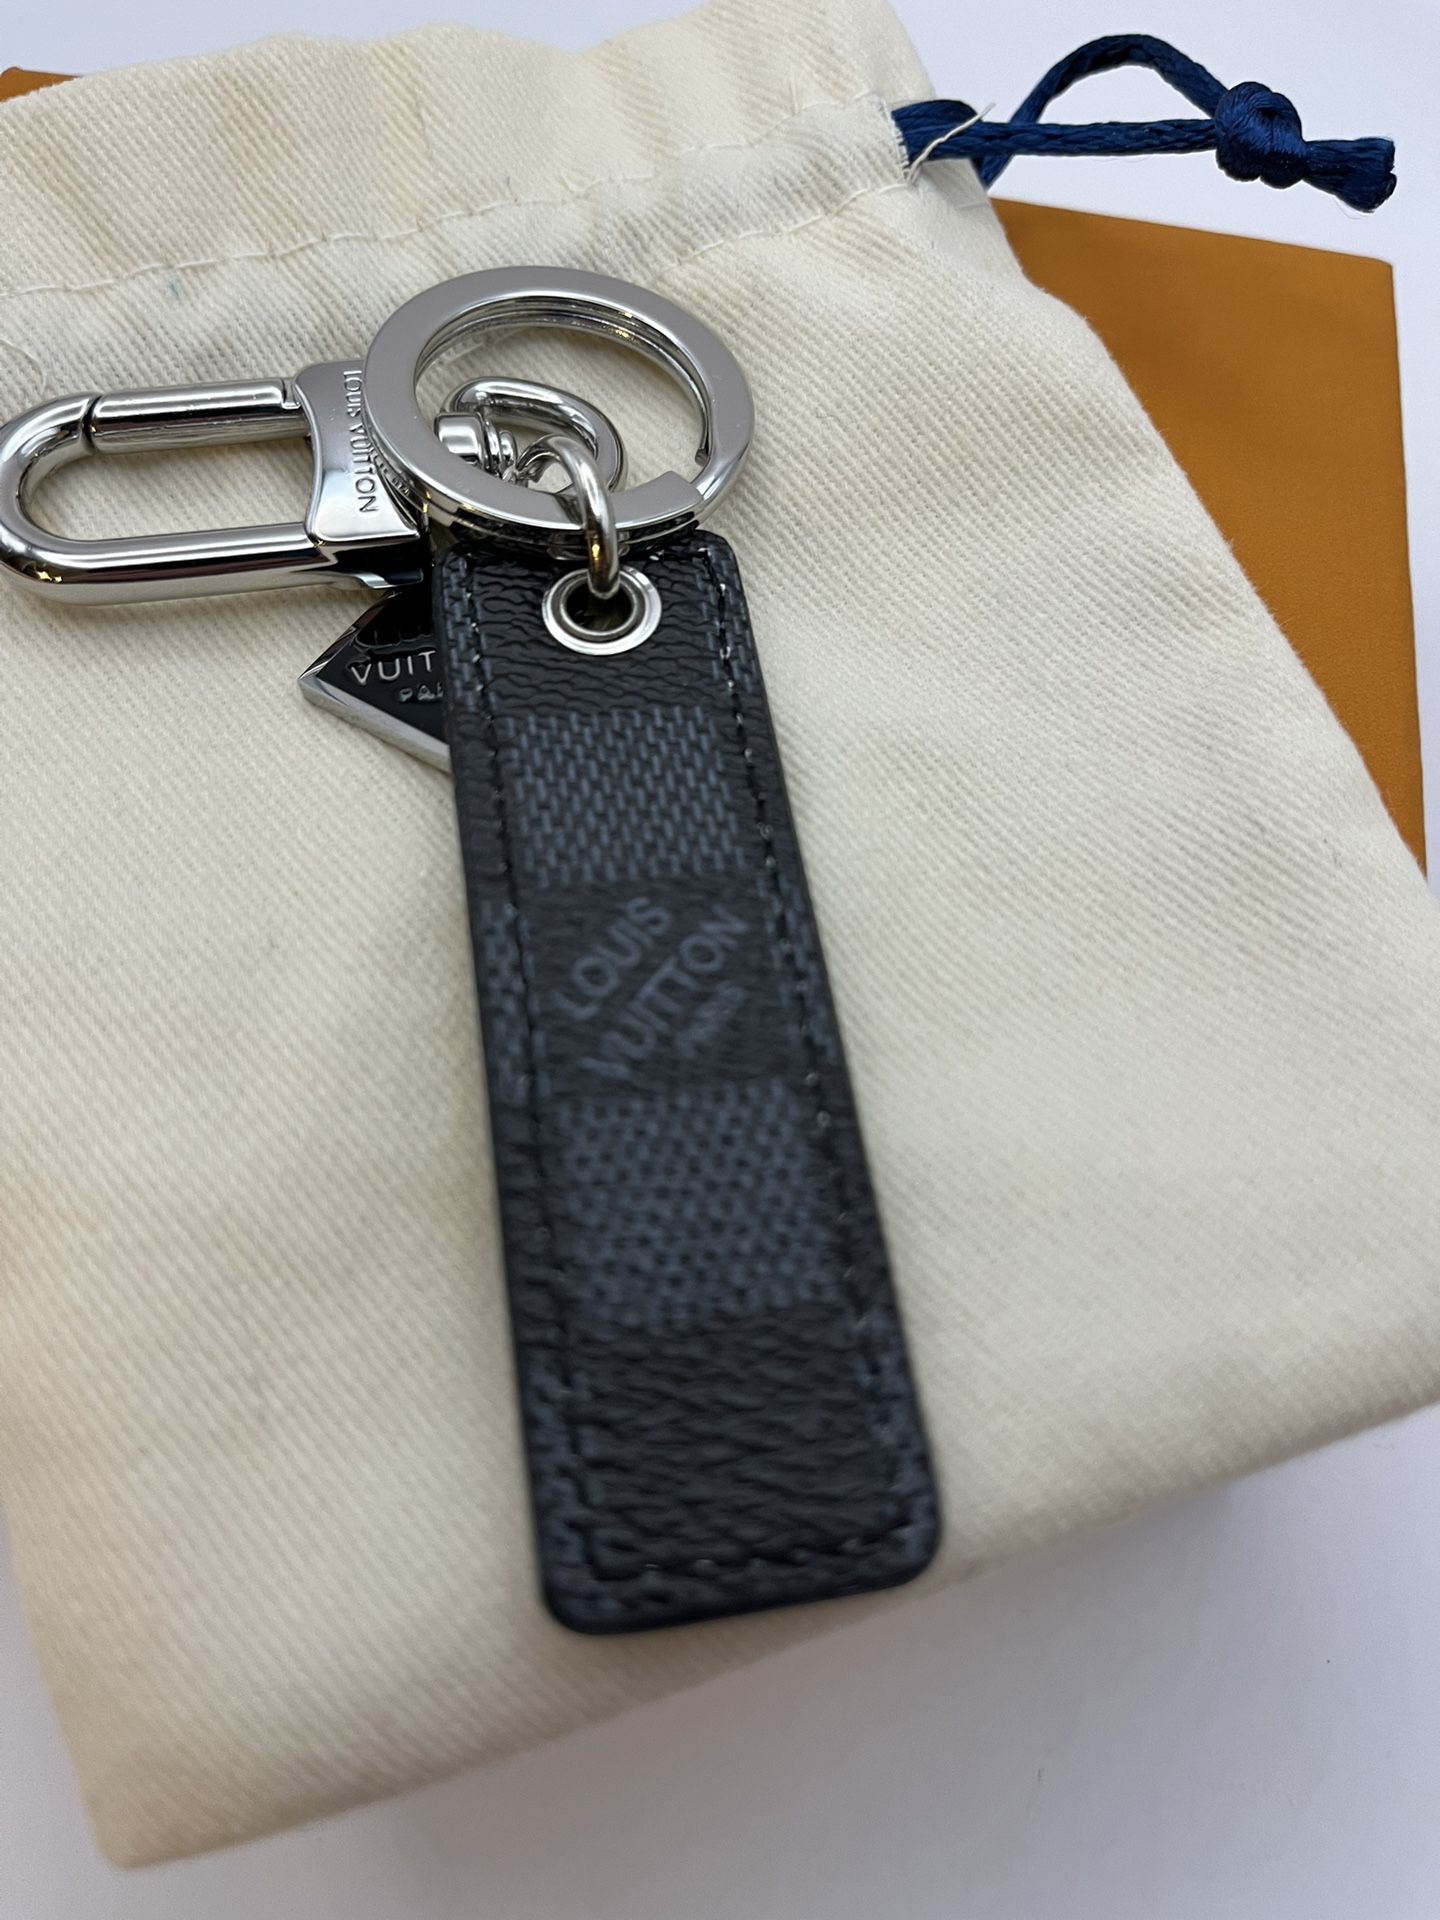 2393 HMTT MONOGRAM FORTUNE COOKIE CHARM & KEY HOLDER, BOX, BAG, INCLUDED -  NEW for Sale in Gallatin, TN - OfferUp